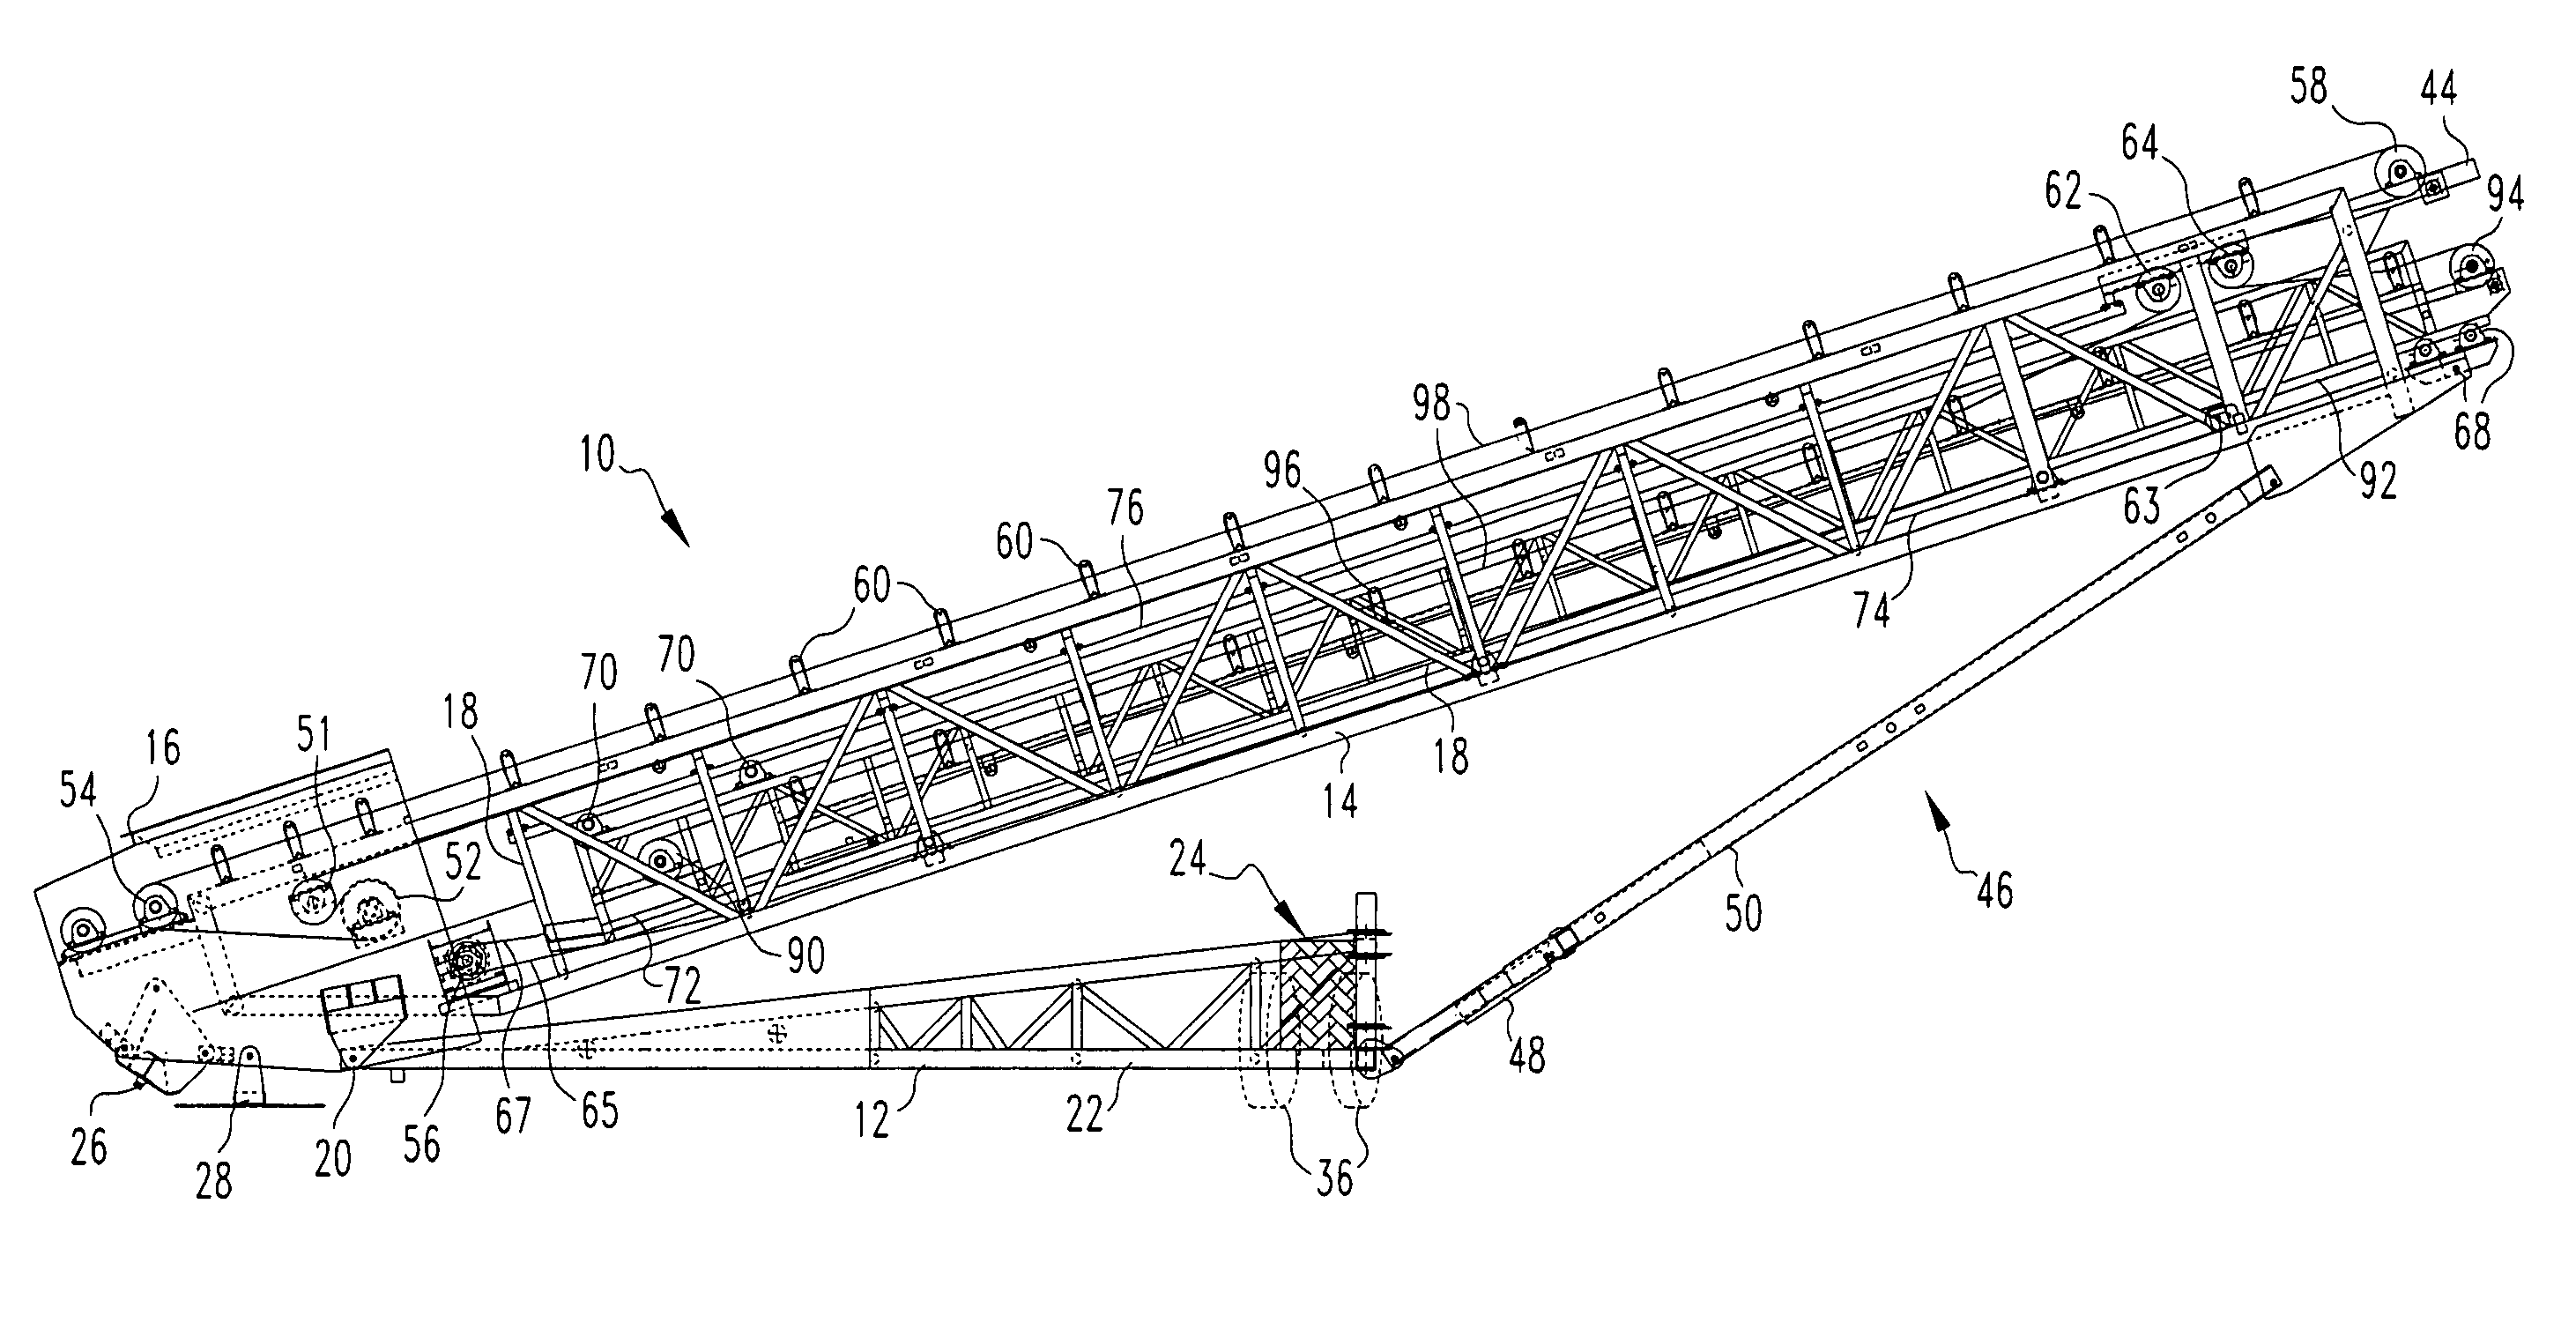 Telescoping stacking conveyor having a single conveyor belt and single drive mechanism for the belt